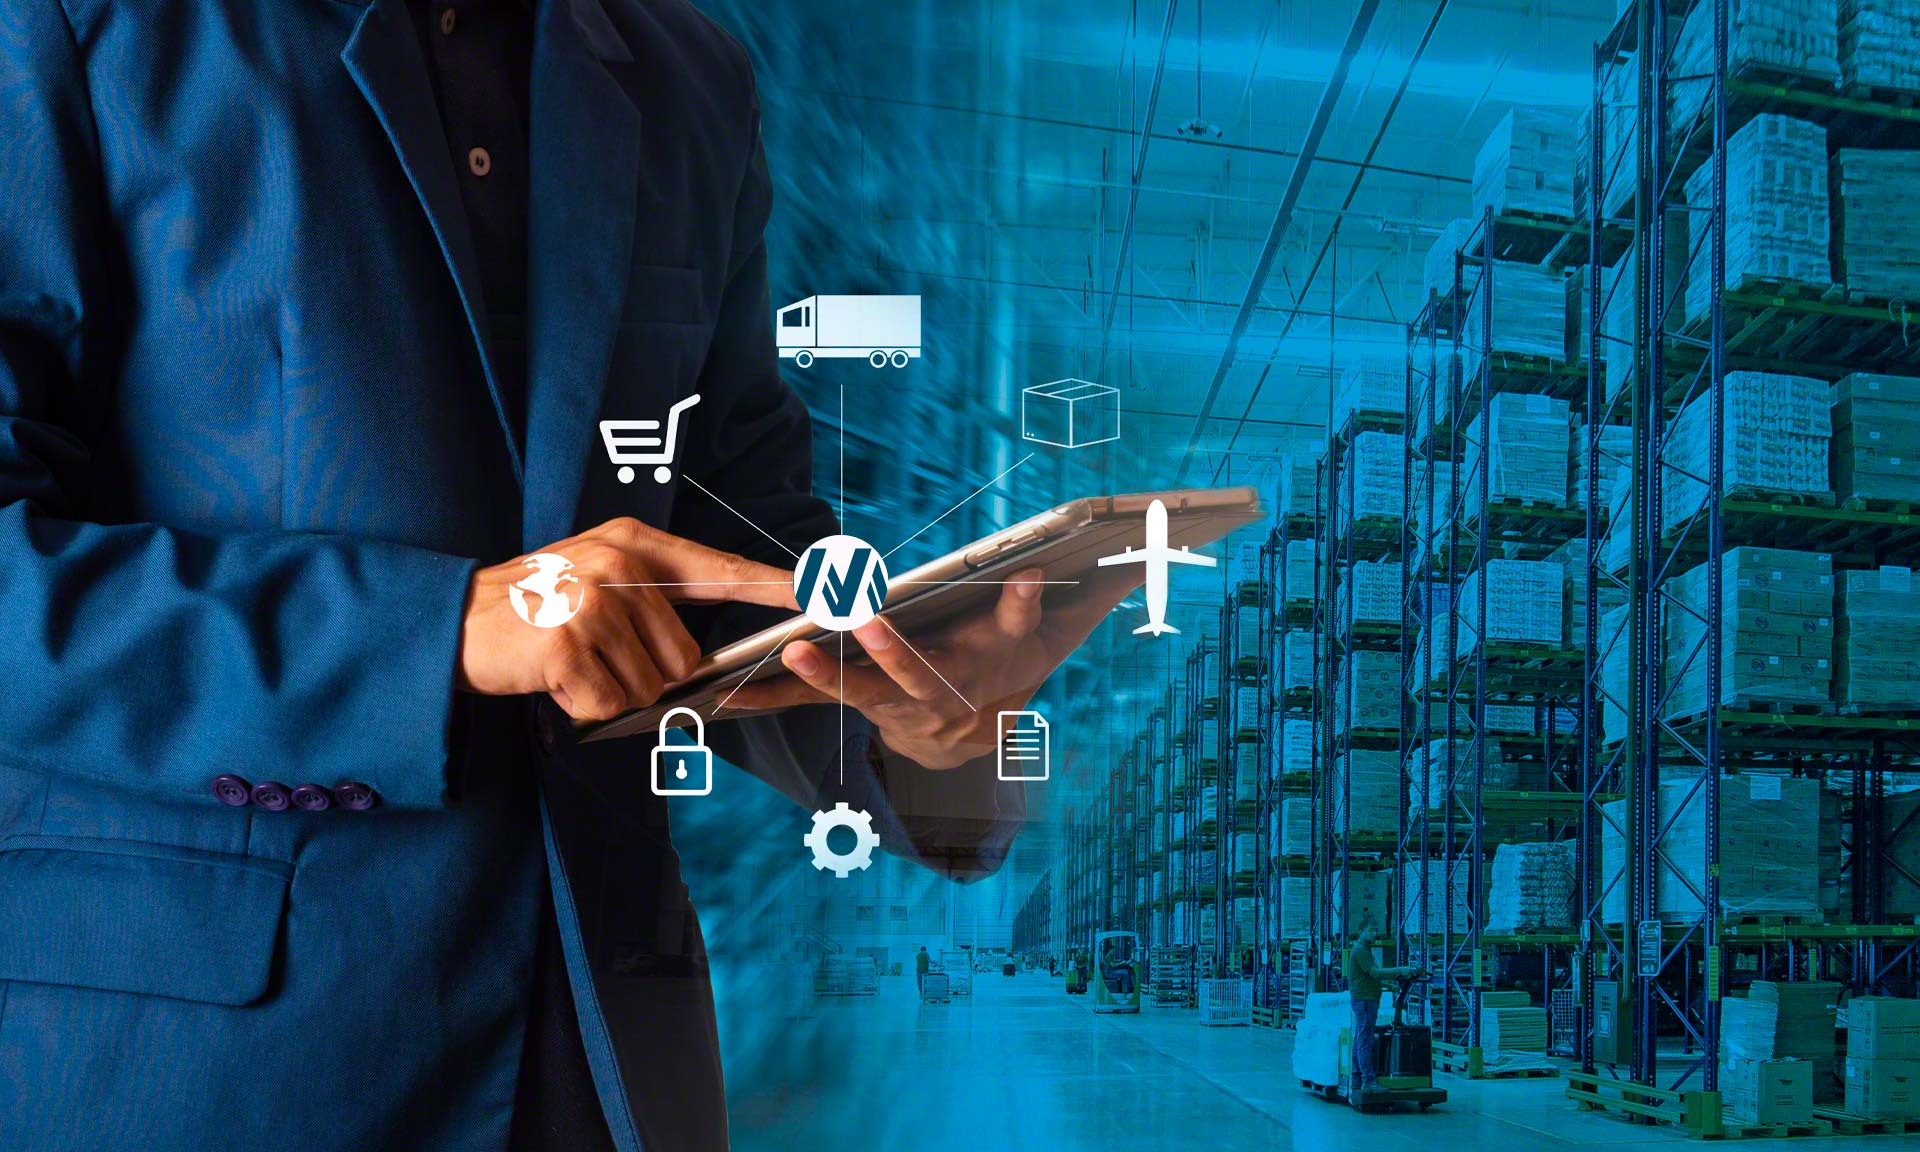 A man in a suit is using a tablet to manage supply chain operations in a warehouse.